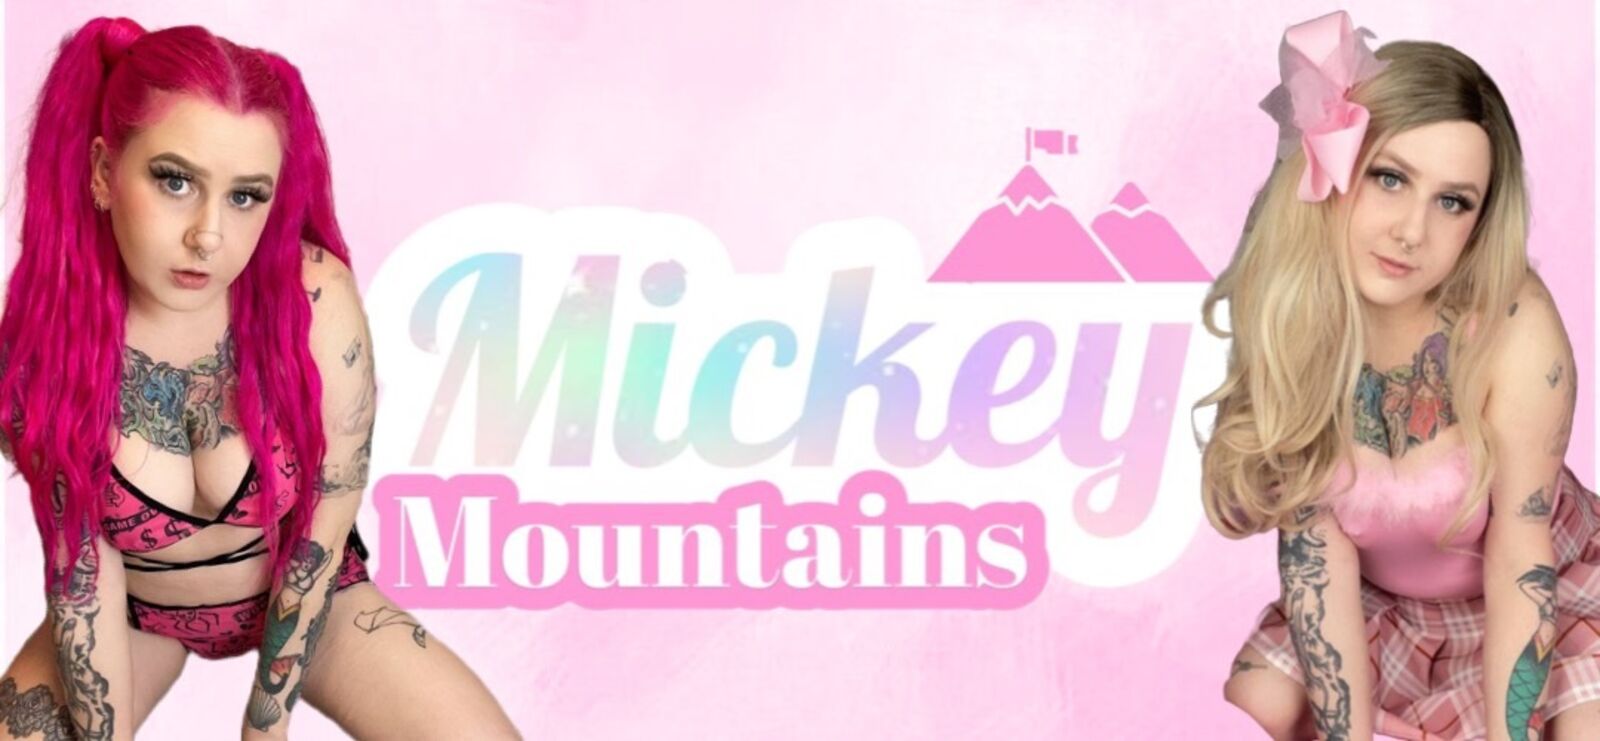 See 🌸 Mickey Mountains 💦 profile